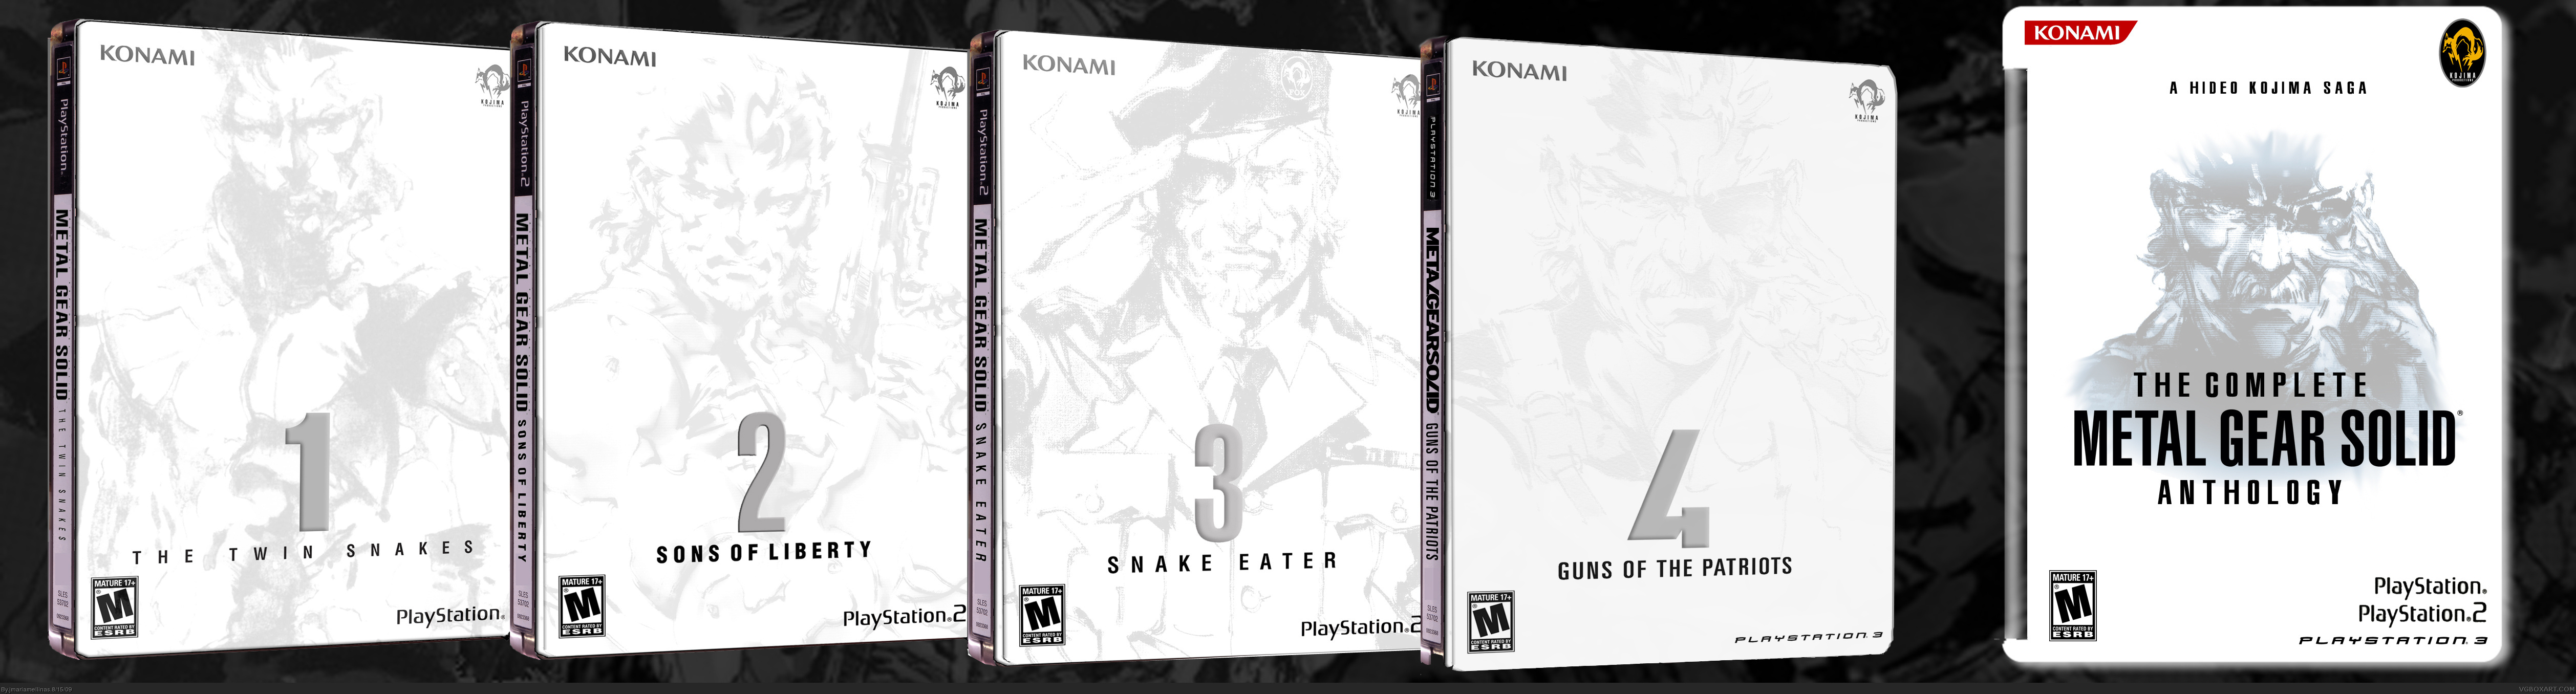 The Complete Metal Gear Anthology box cover